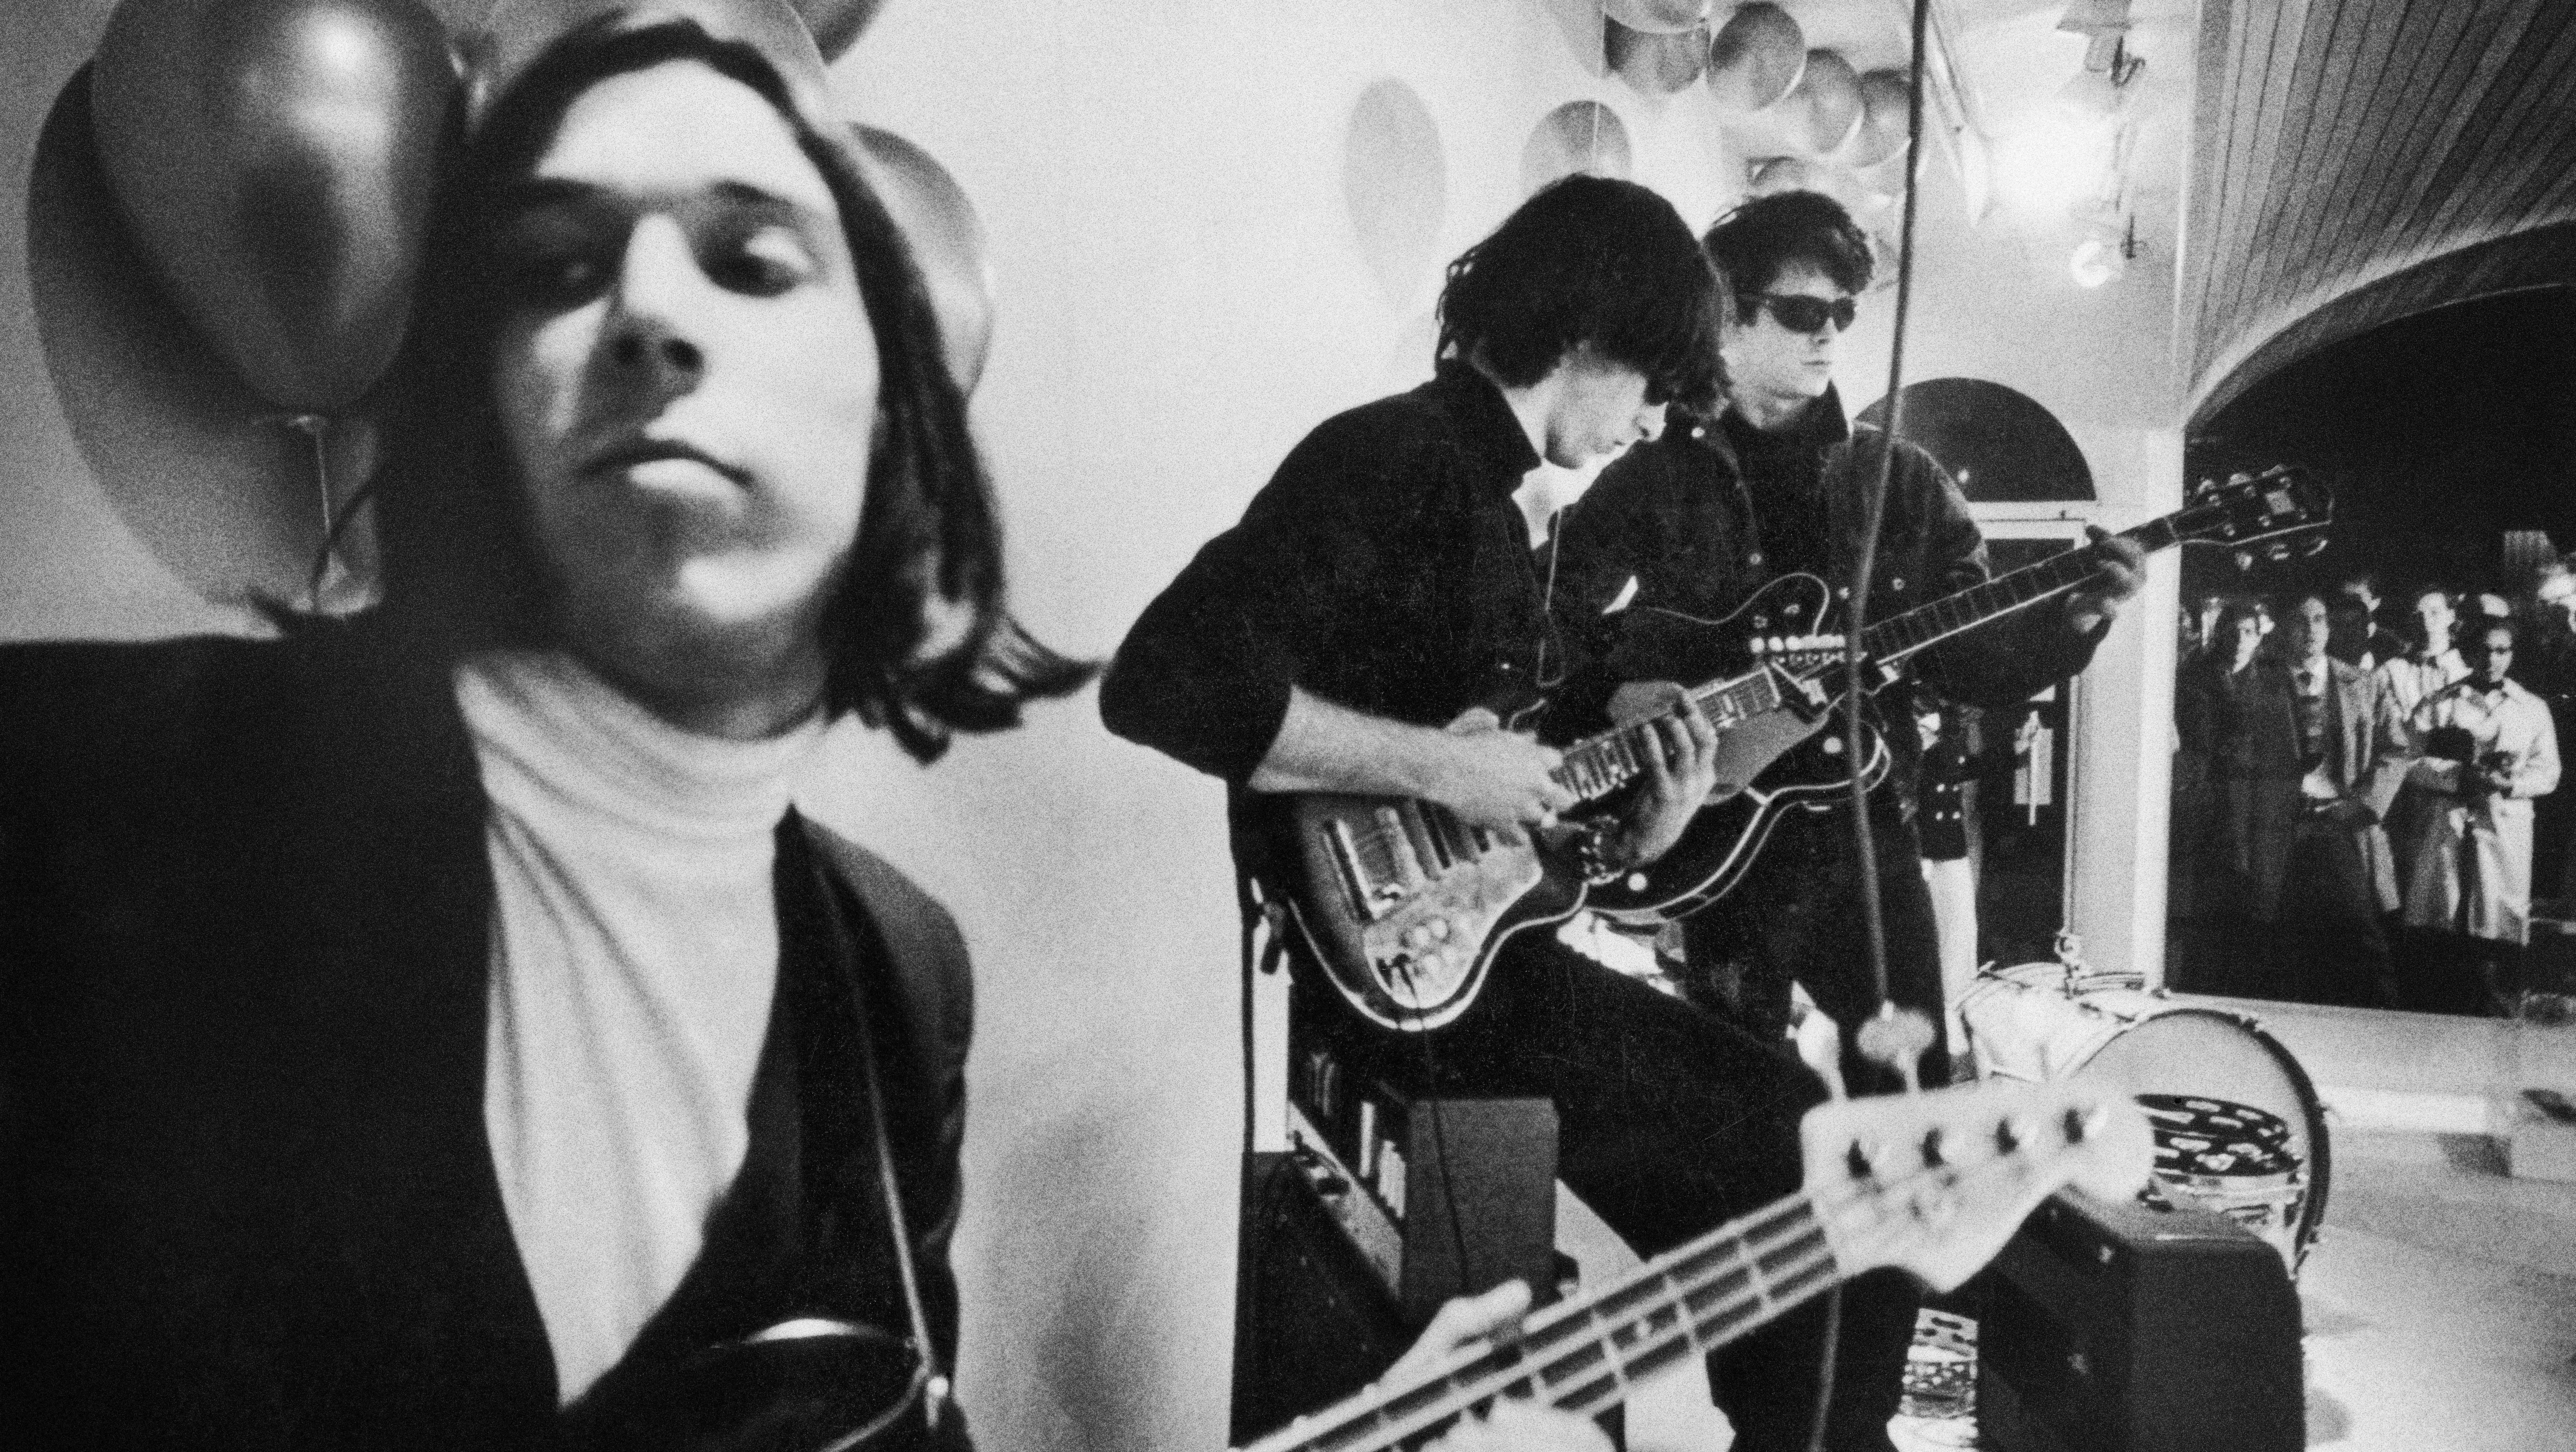 Todd Haynes’ The Velvet Underground doc trailer is loaded with hits, pics, and clips